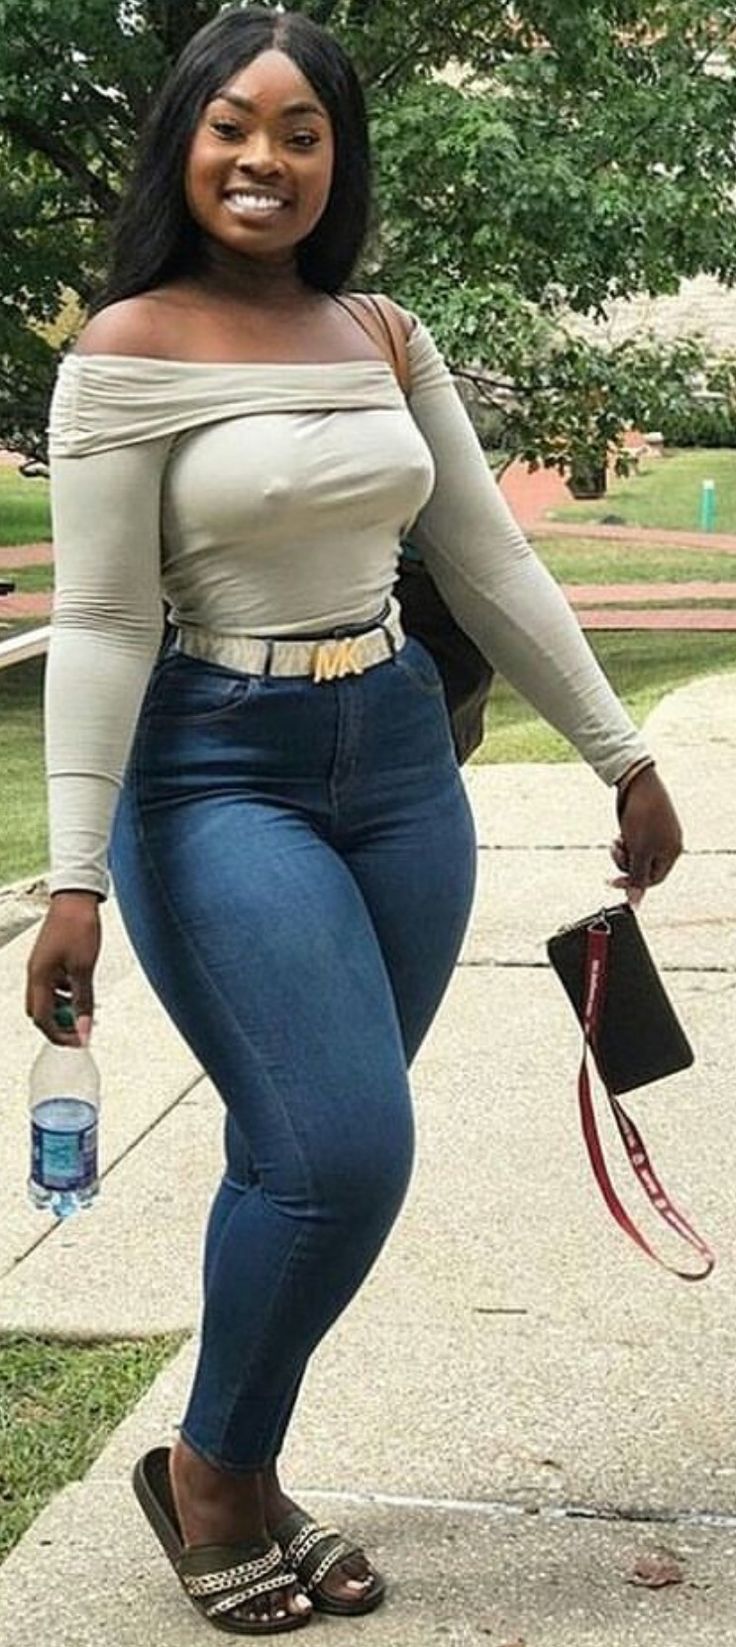 pictures of thick black women